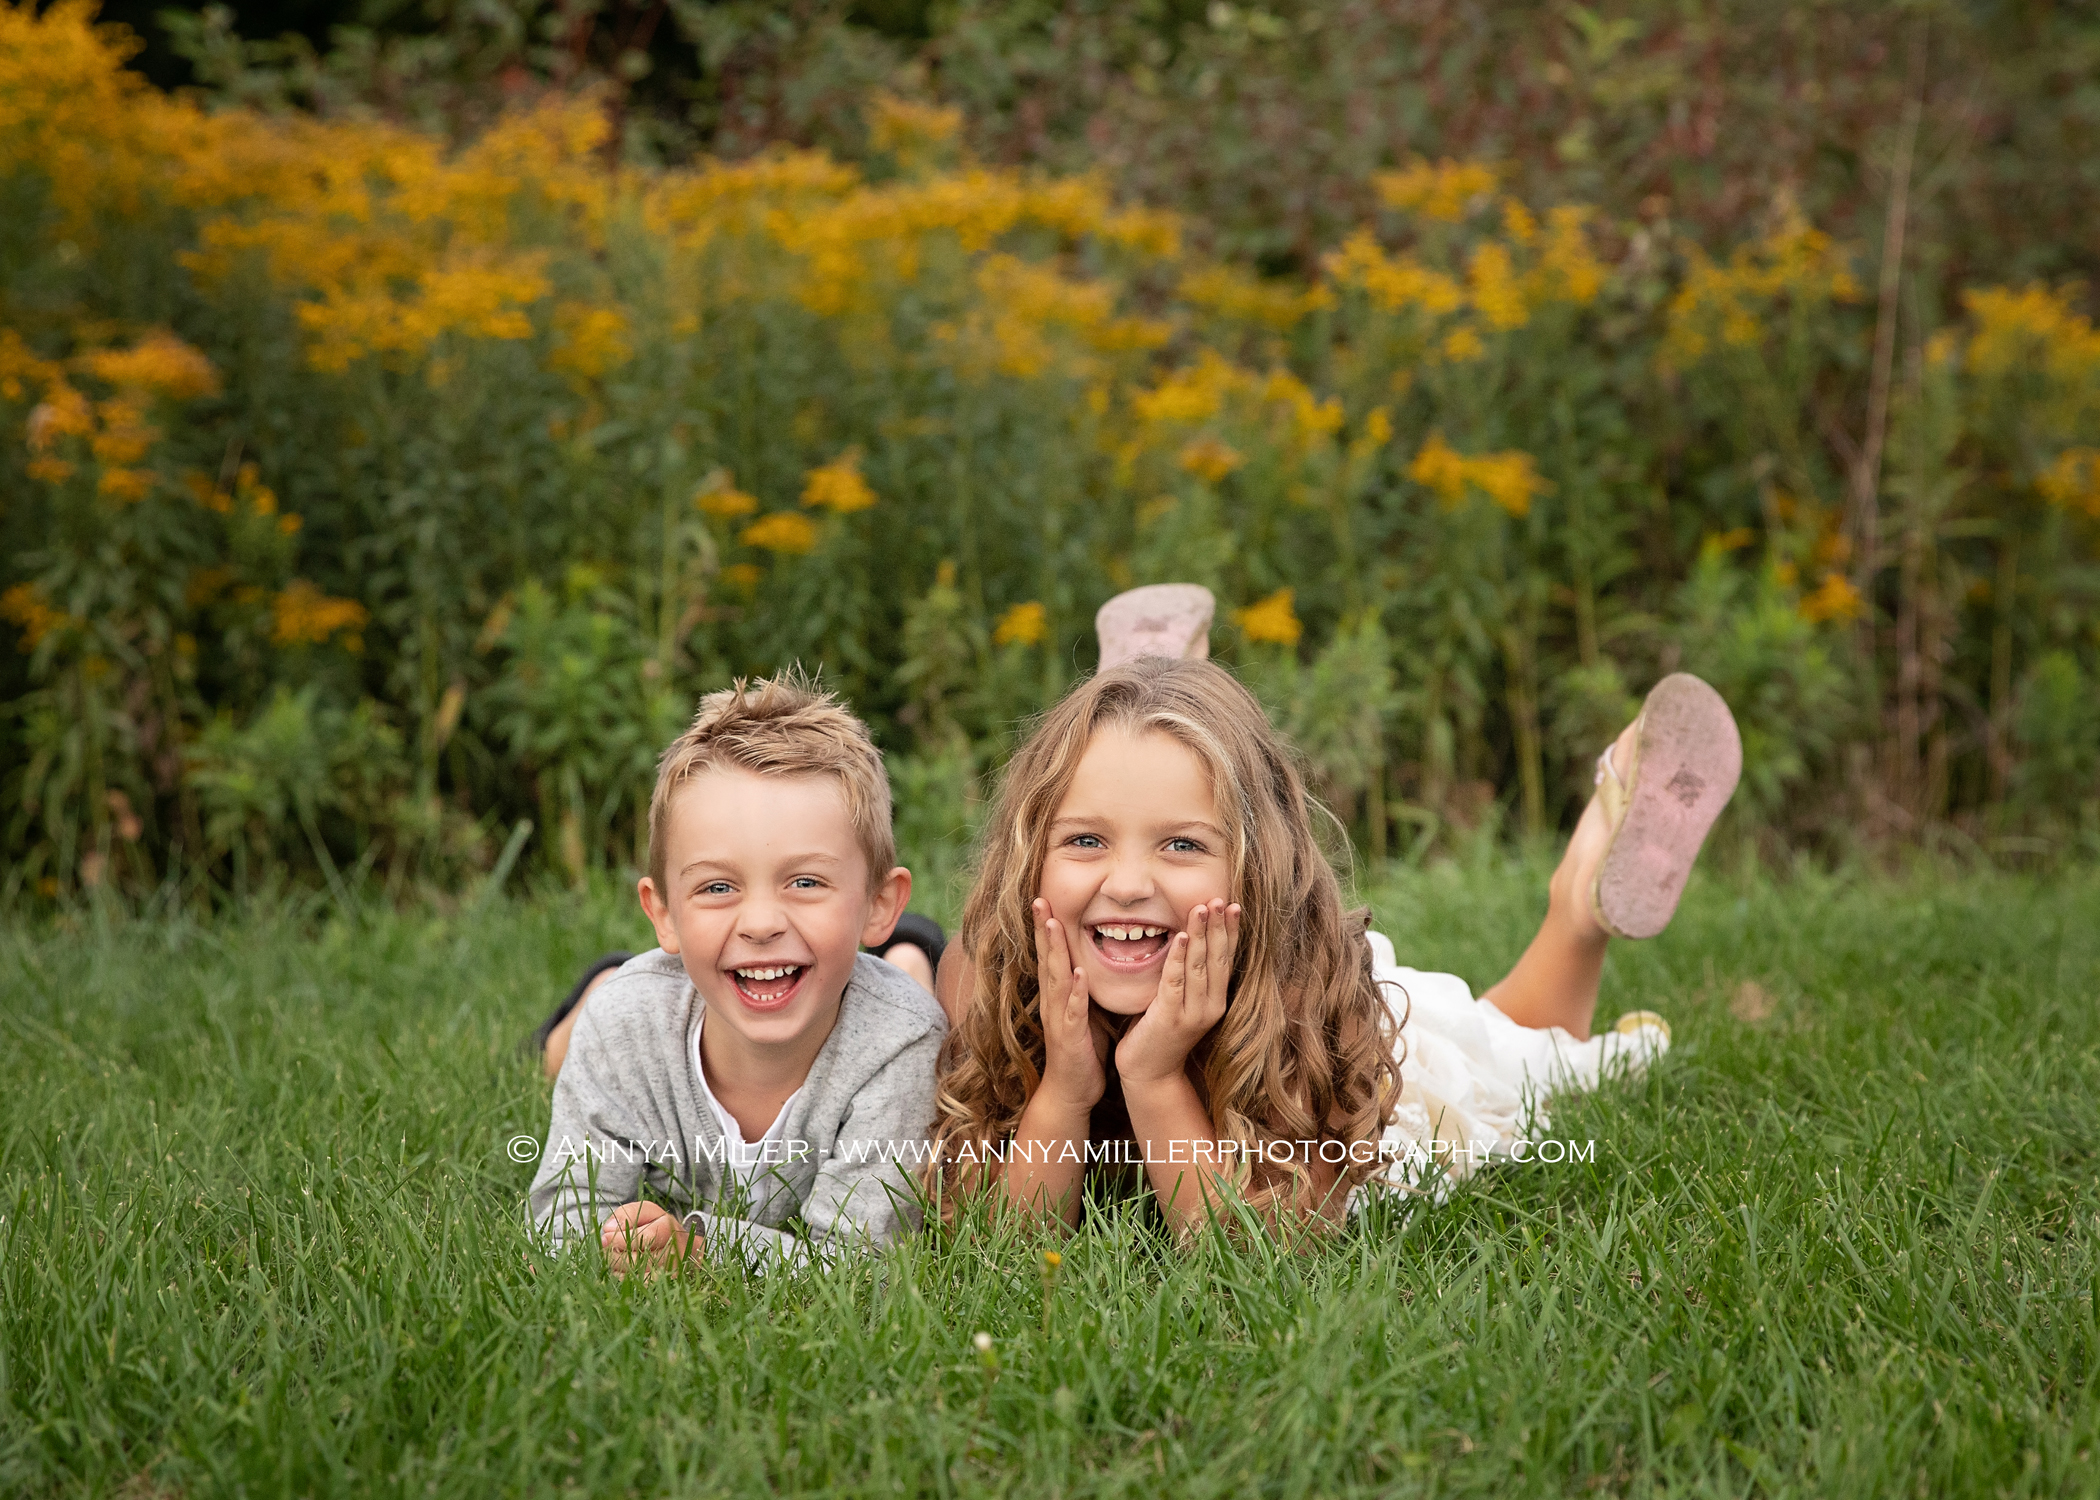 Outdoor portraits by pickering family photographer Annya Miller